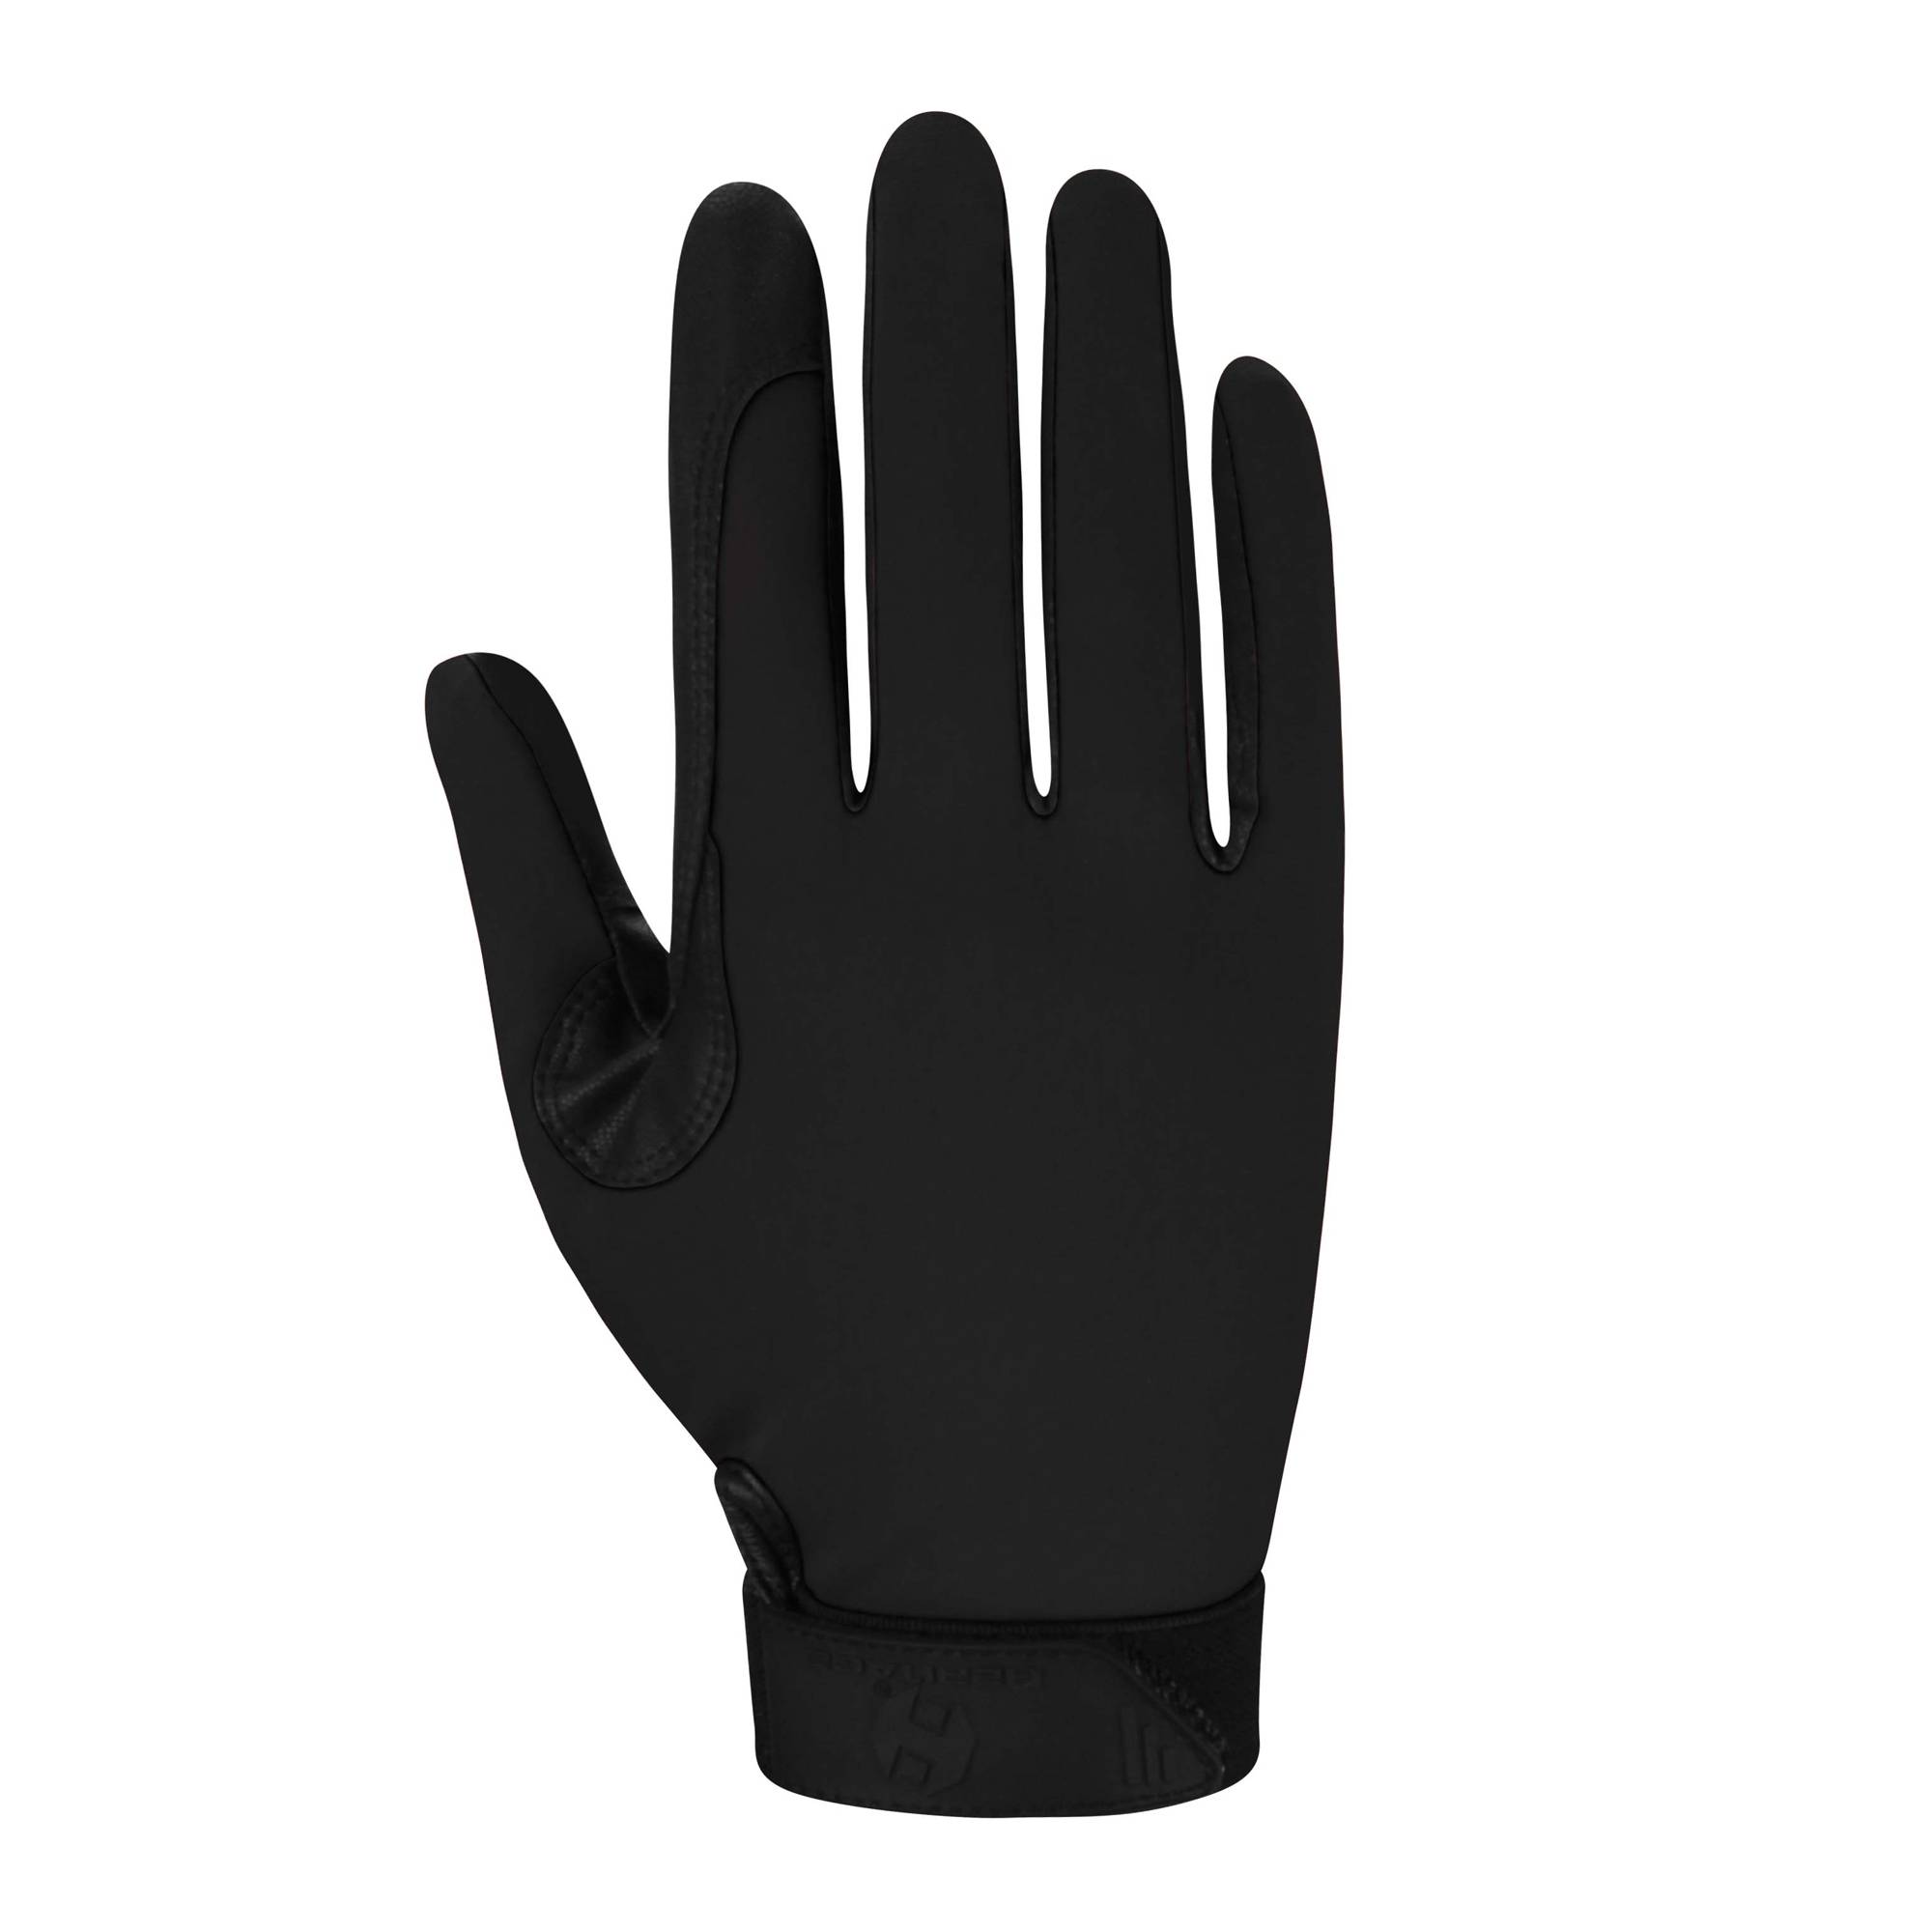 Irideon Super Grip Ladies' Riding Gloves with Rein Cut Fingers for Control 